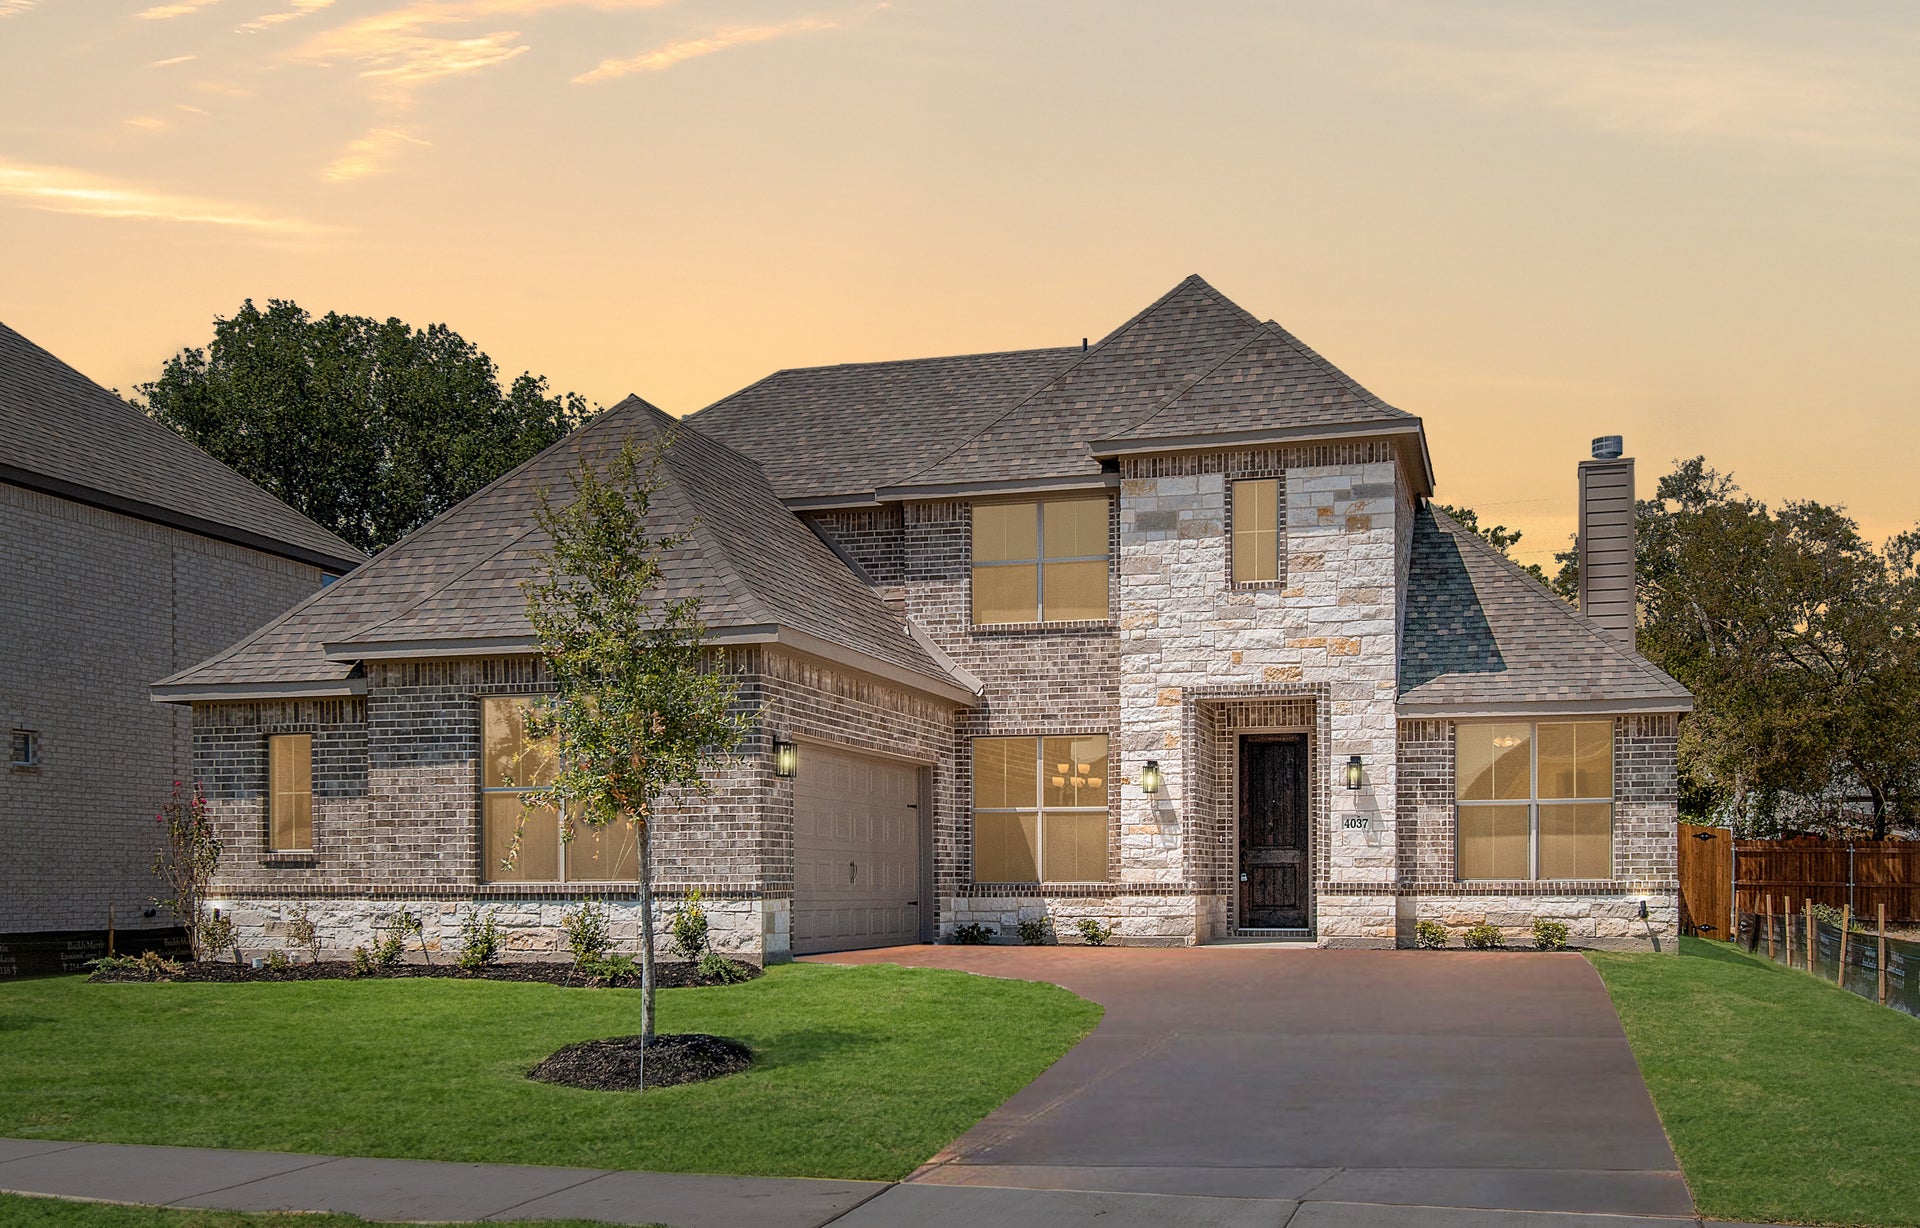 2972 B with Stone. 2,972sf New Home in Joshua, TX